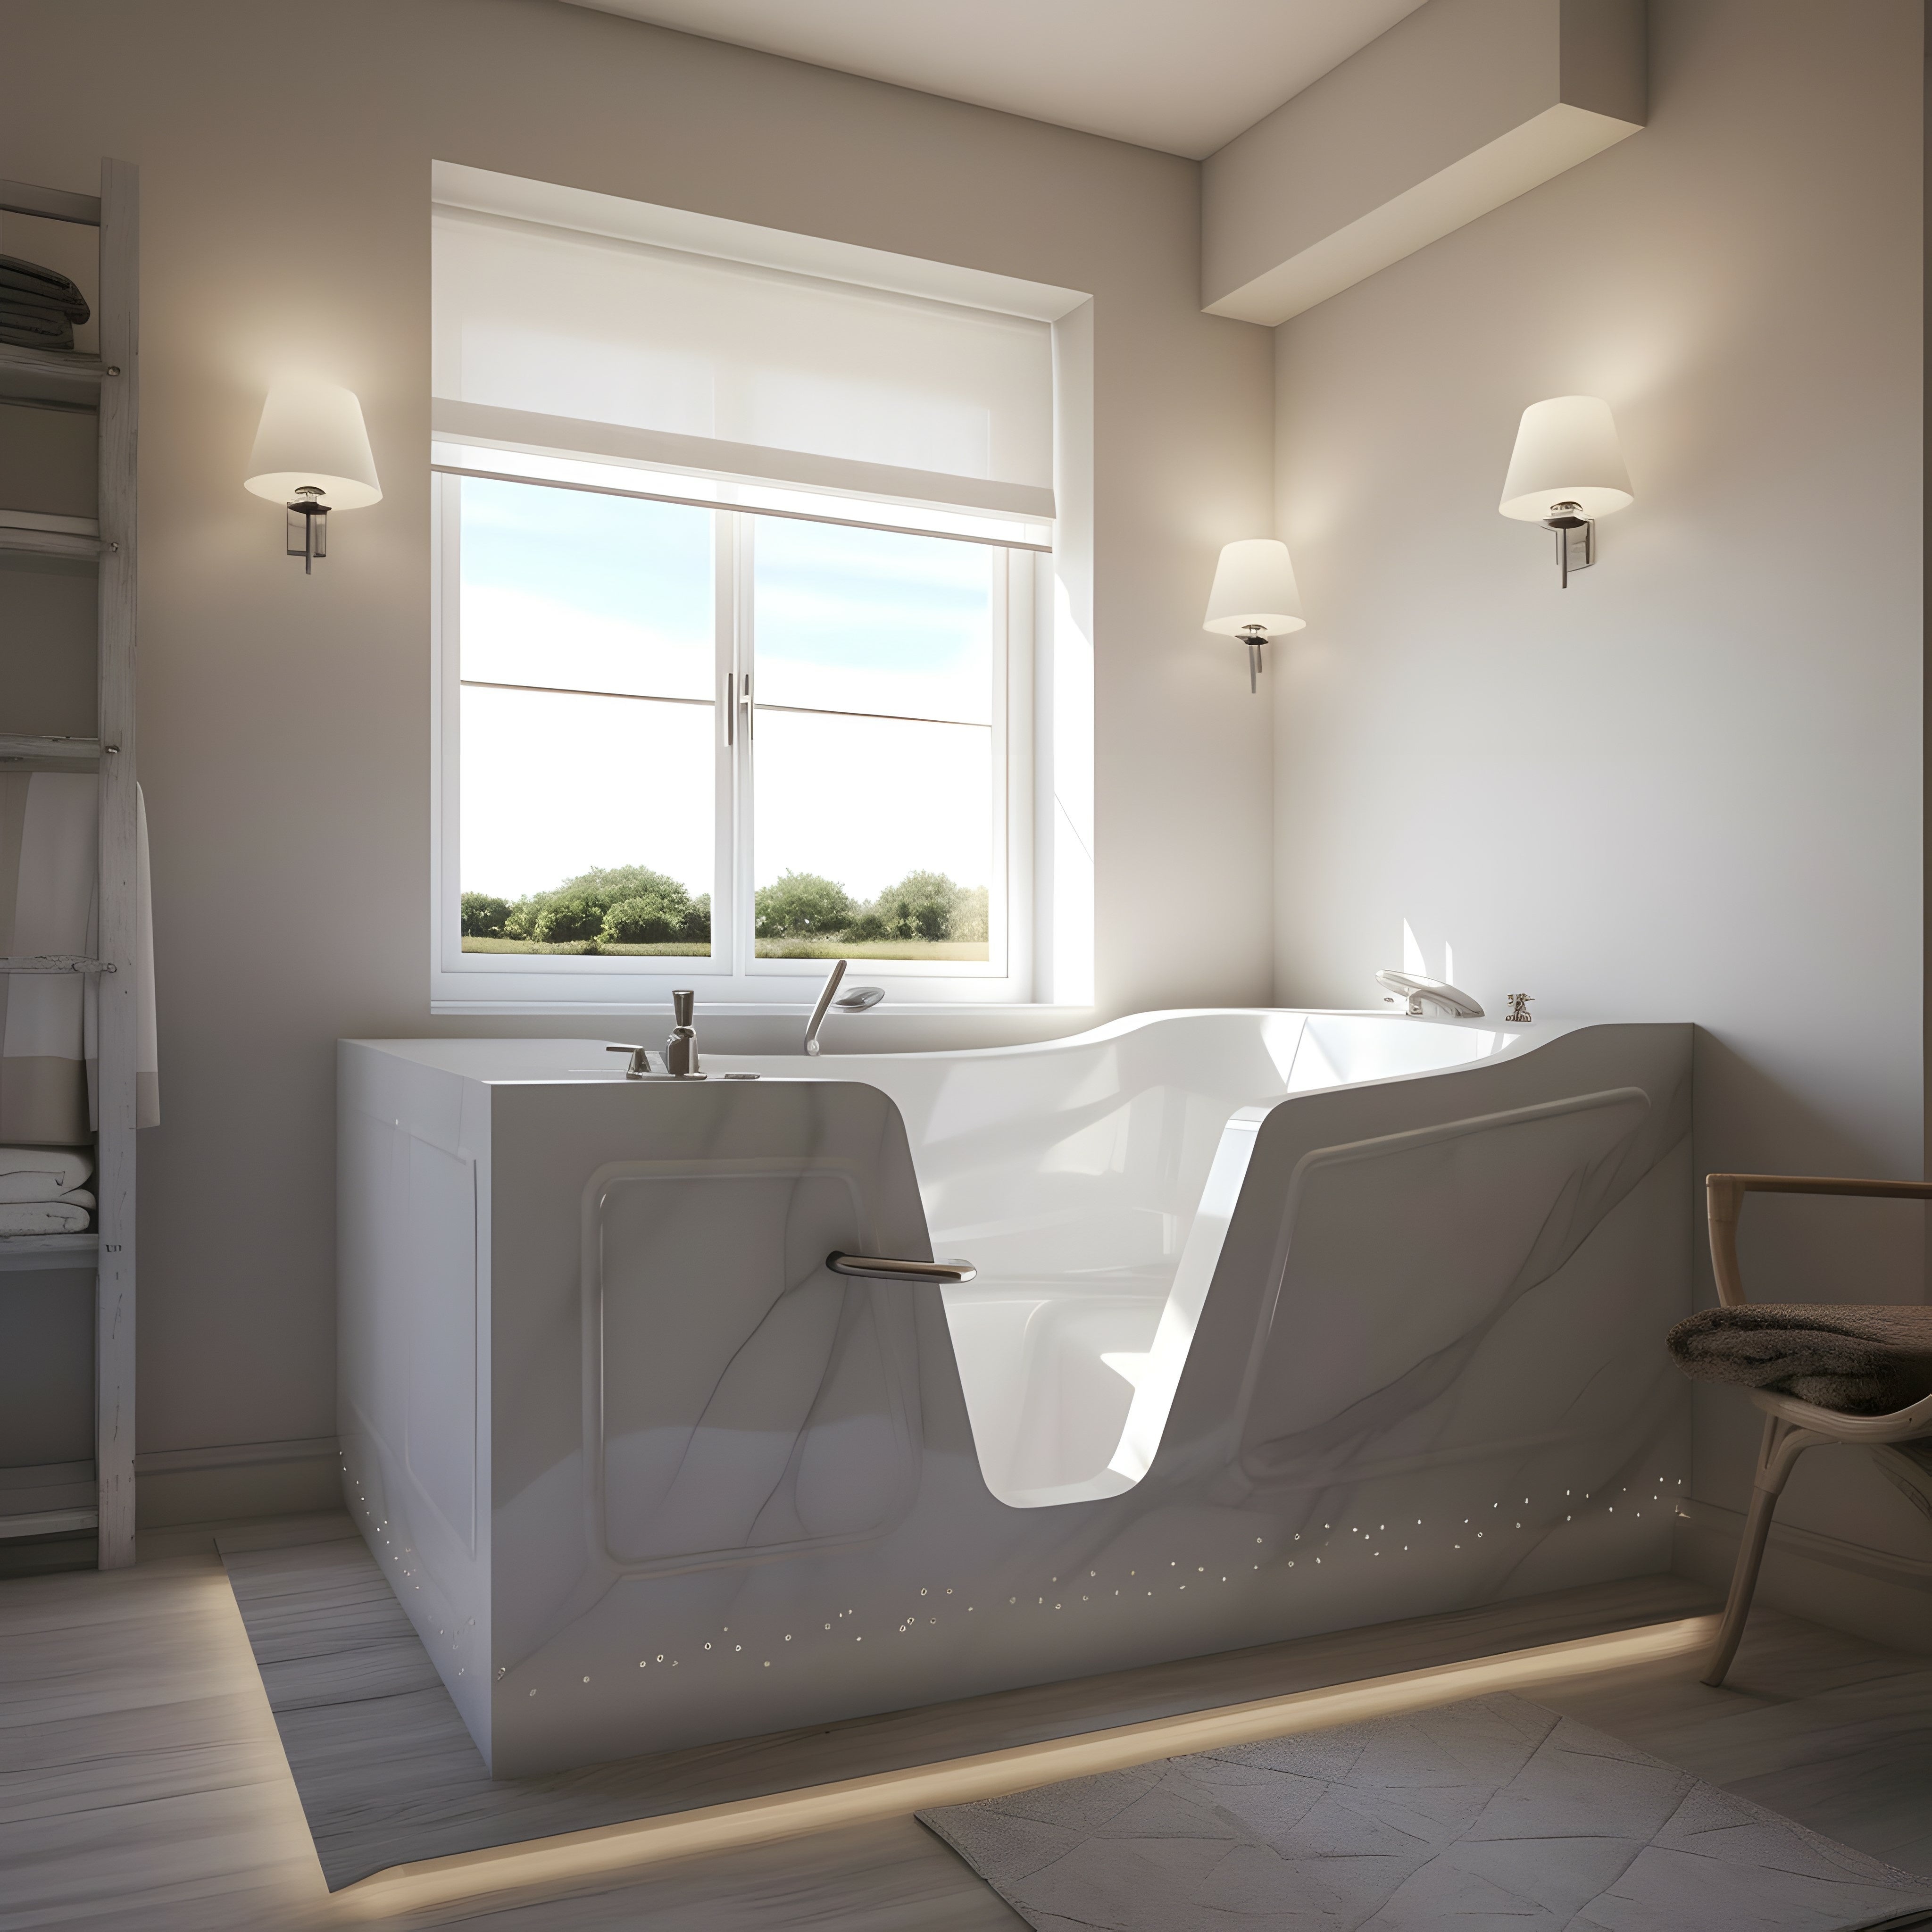 Why Should You Consider Installing A Walk-In Bathtub In Your Home?